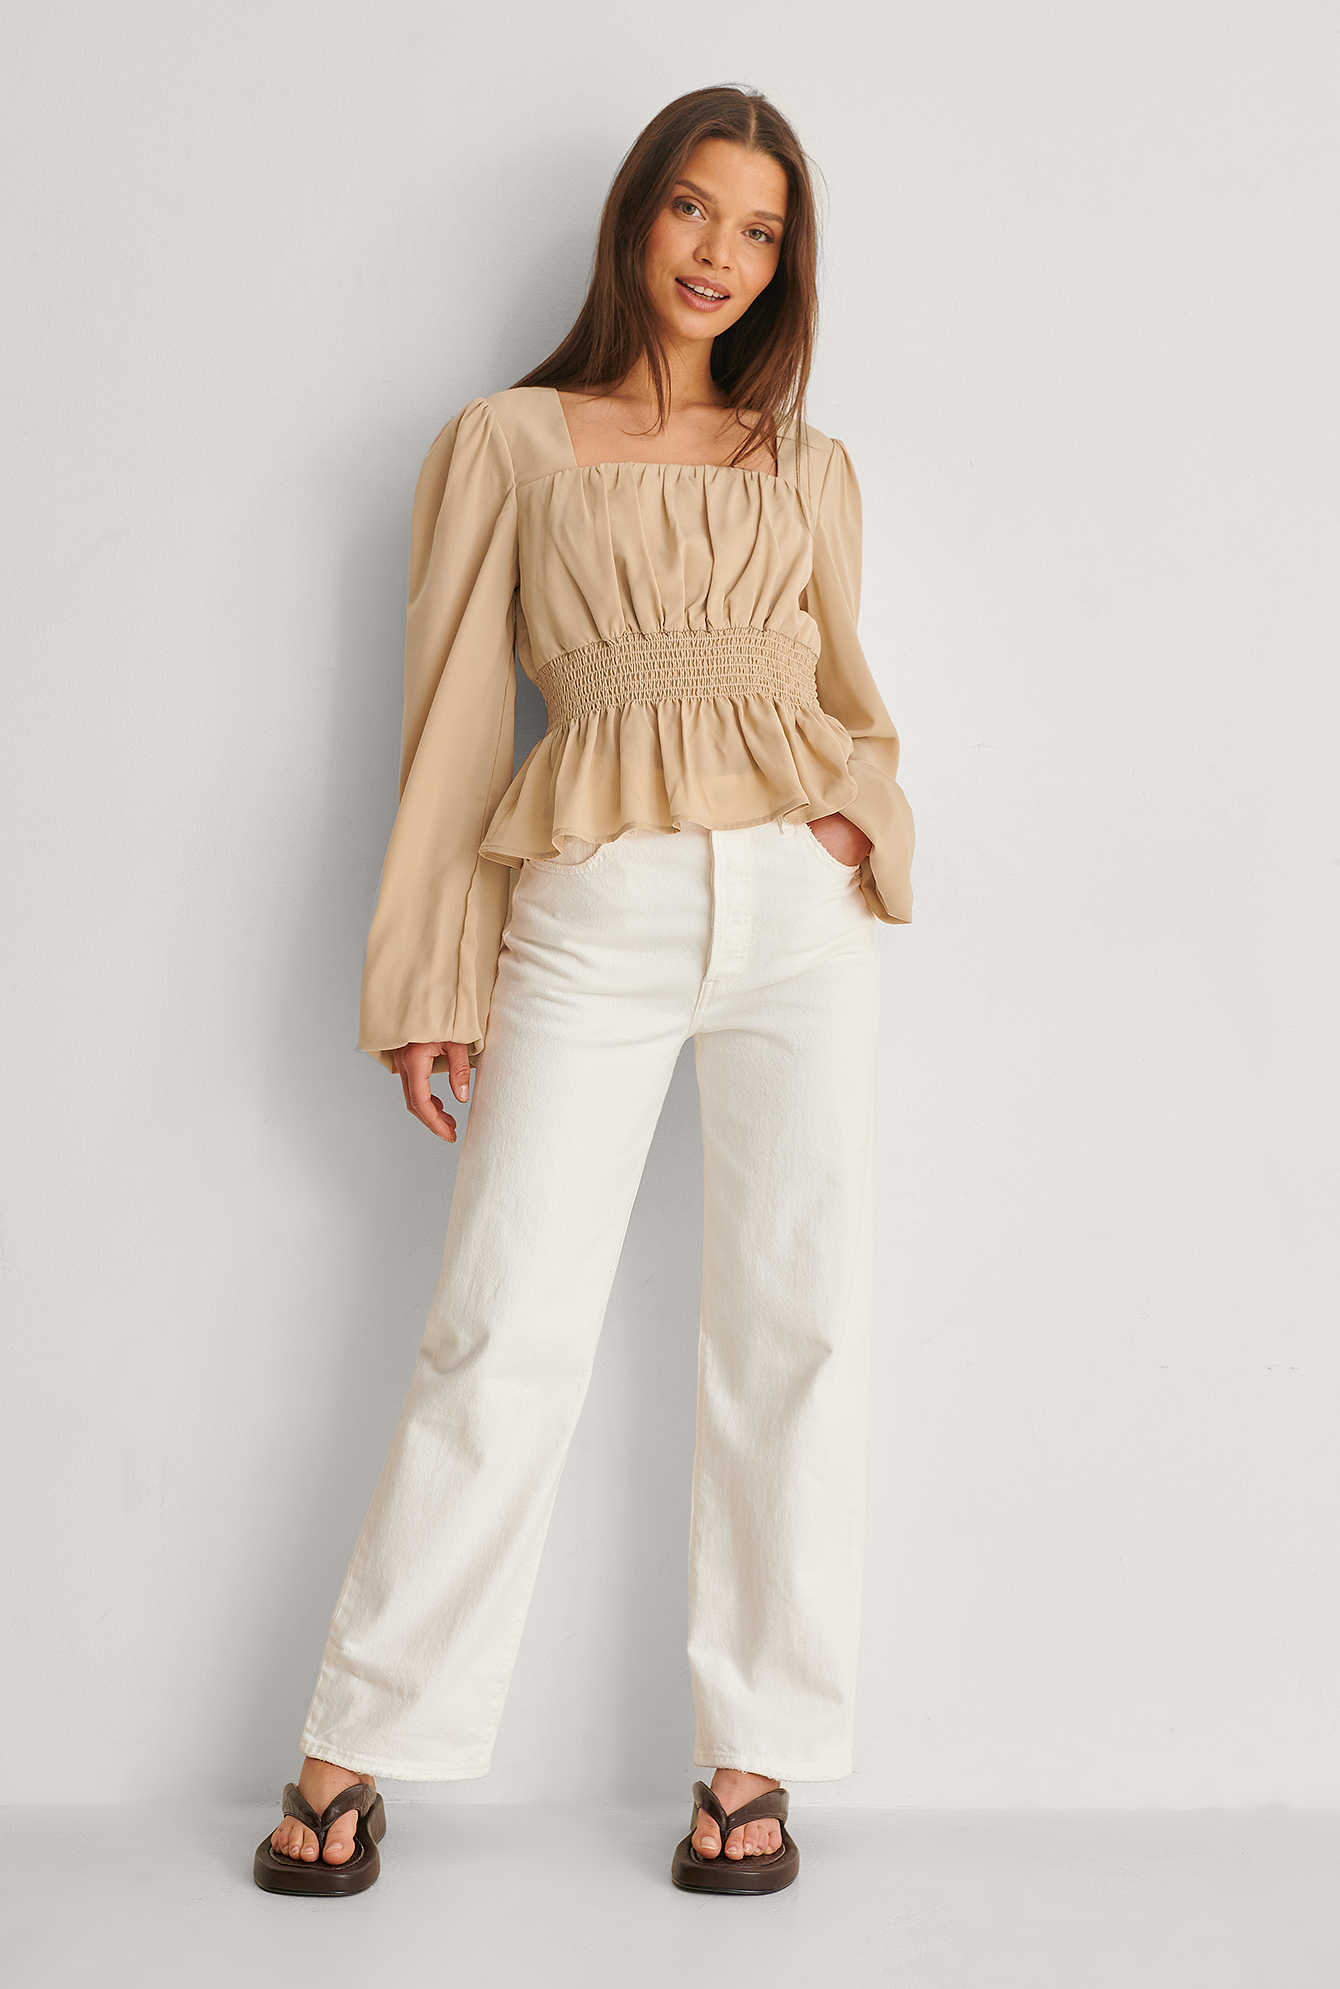 Smock Waist LS Blouse Outfit.